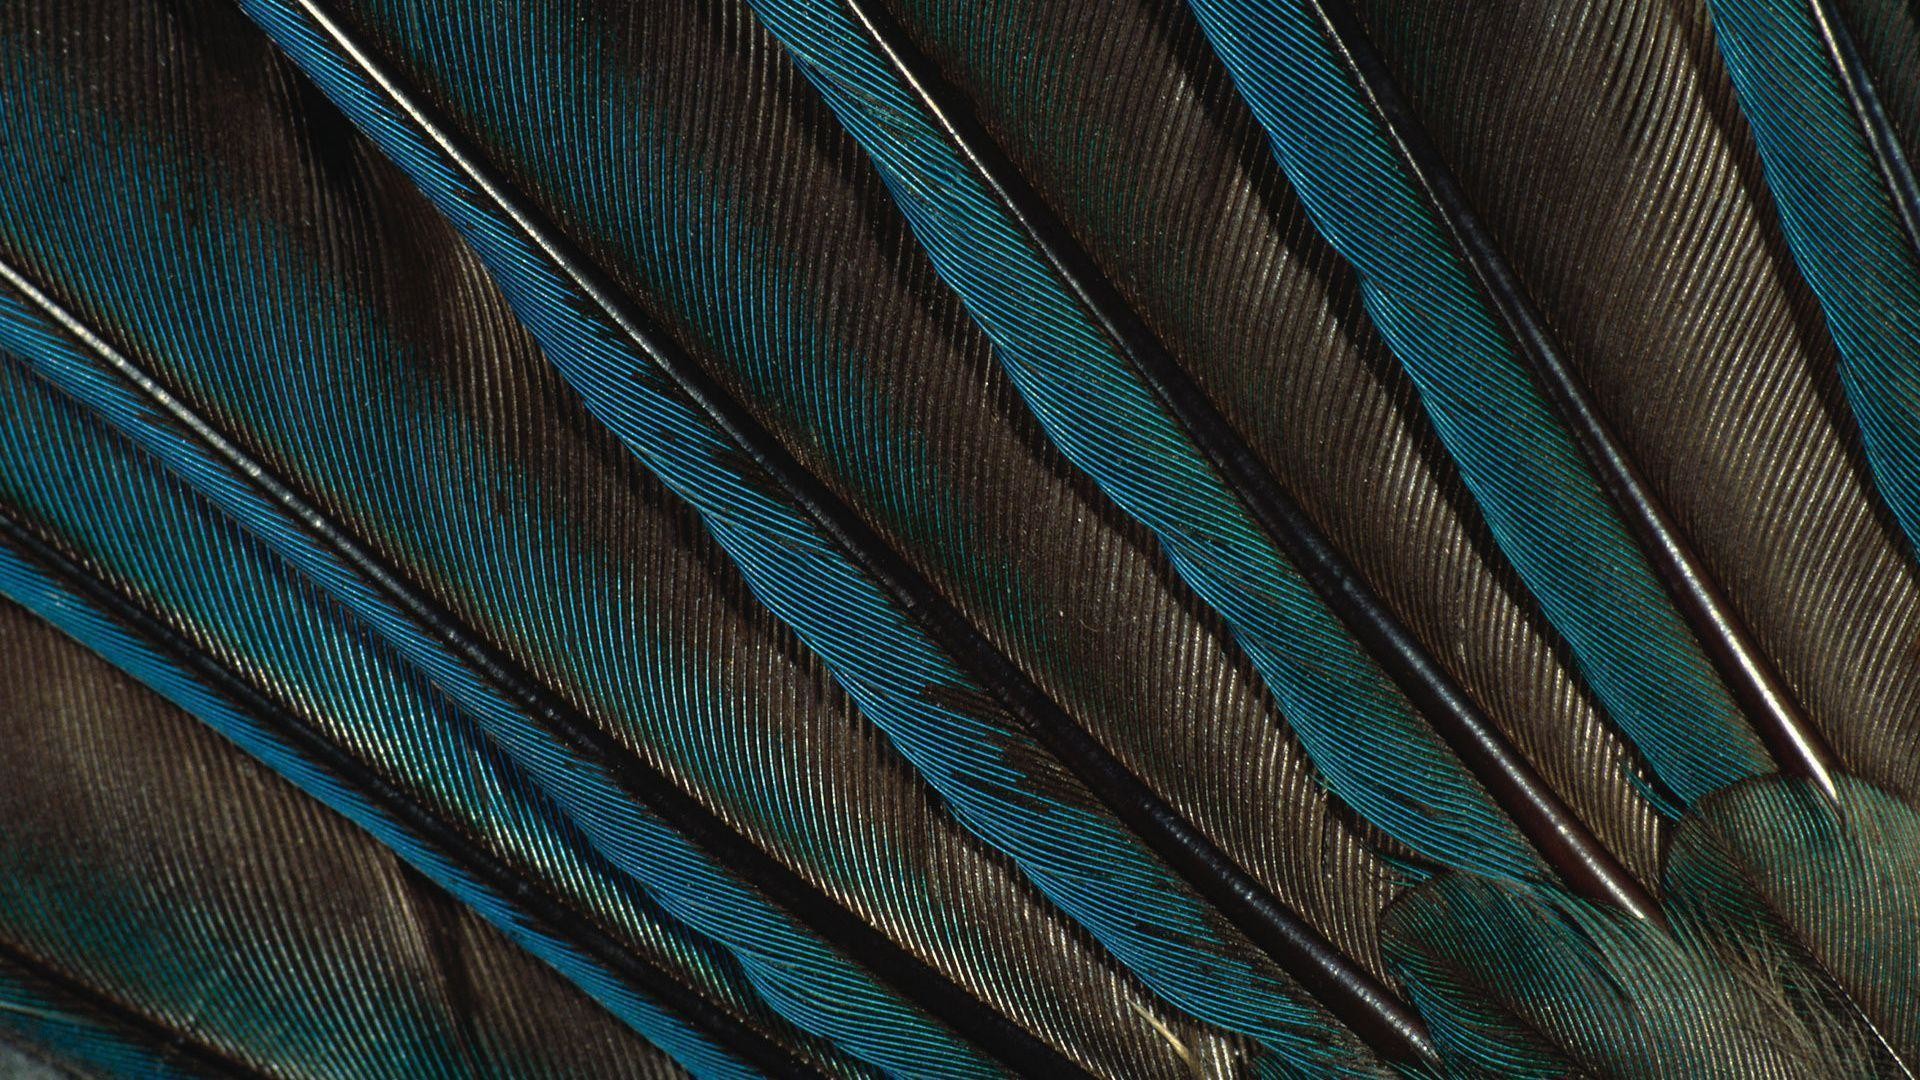 1920x1080  Peacock Feather, Pen, Green Wallpaper, Peacock, Feathers .